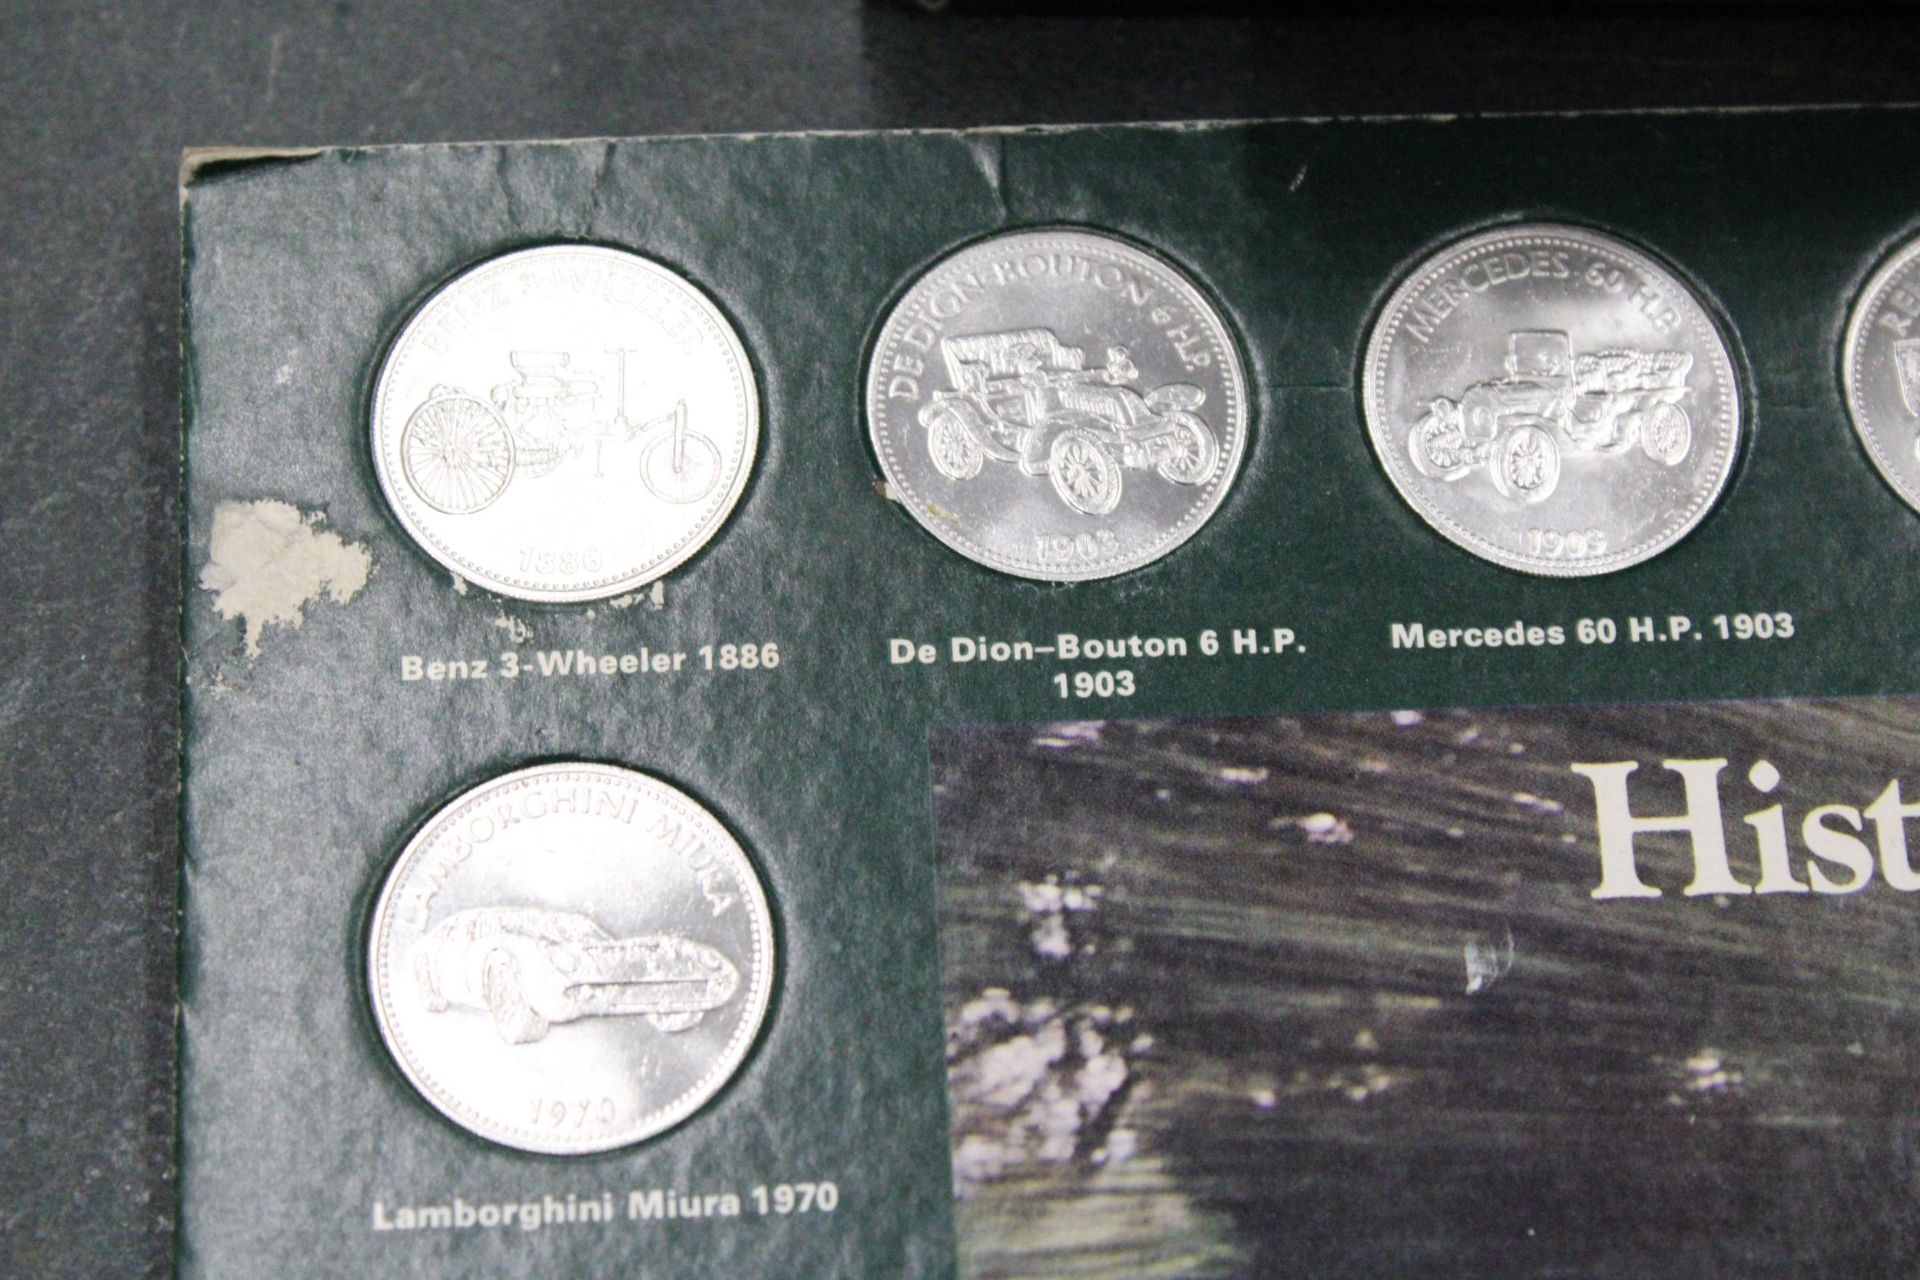 THREE SETS OF SHELL COLLECTABLE COINS ON CARDS, TO INCLUDE MAN'S FIRST FLIGHT X 2 AND HISTORIC CARS - Image 7 of 7